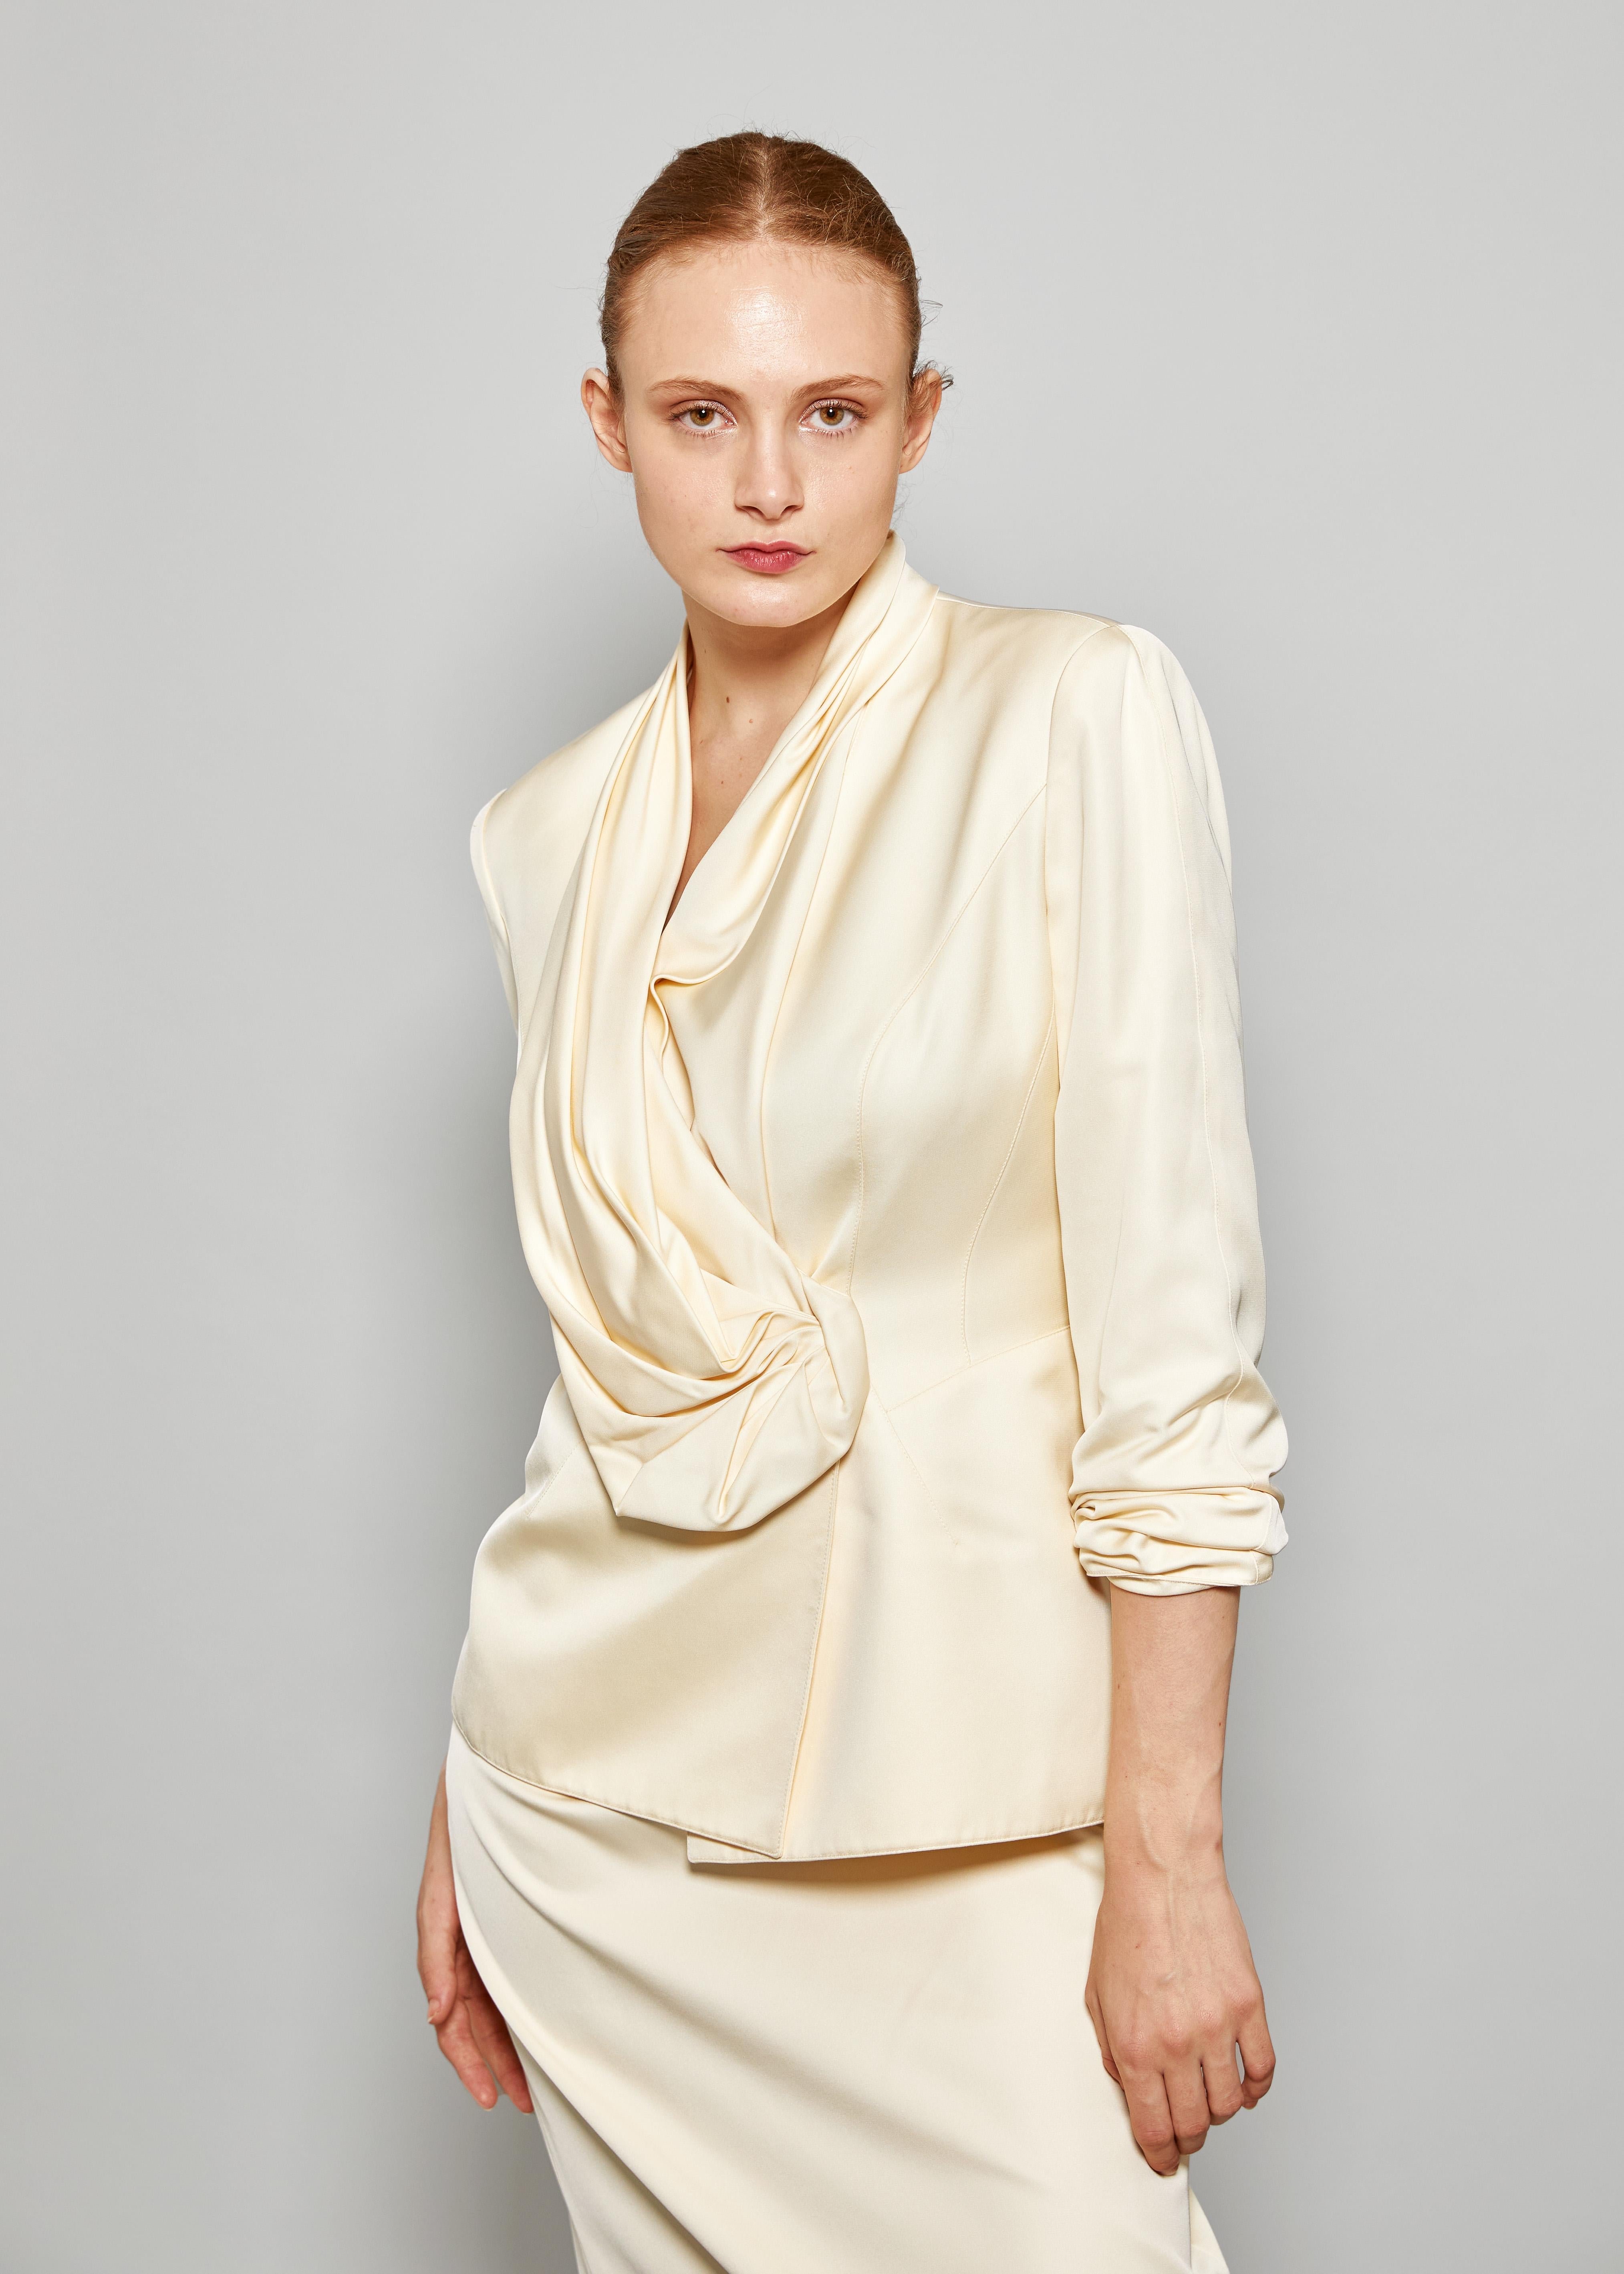 Thierry Mugler 1990's Ivory Silk Skirt Suit In Excellent Condition For Sale In Los Angeles, CA